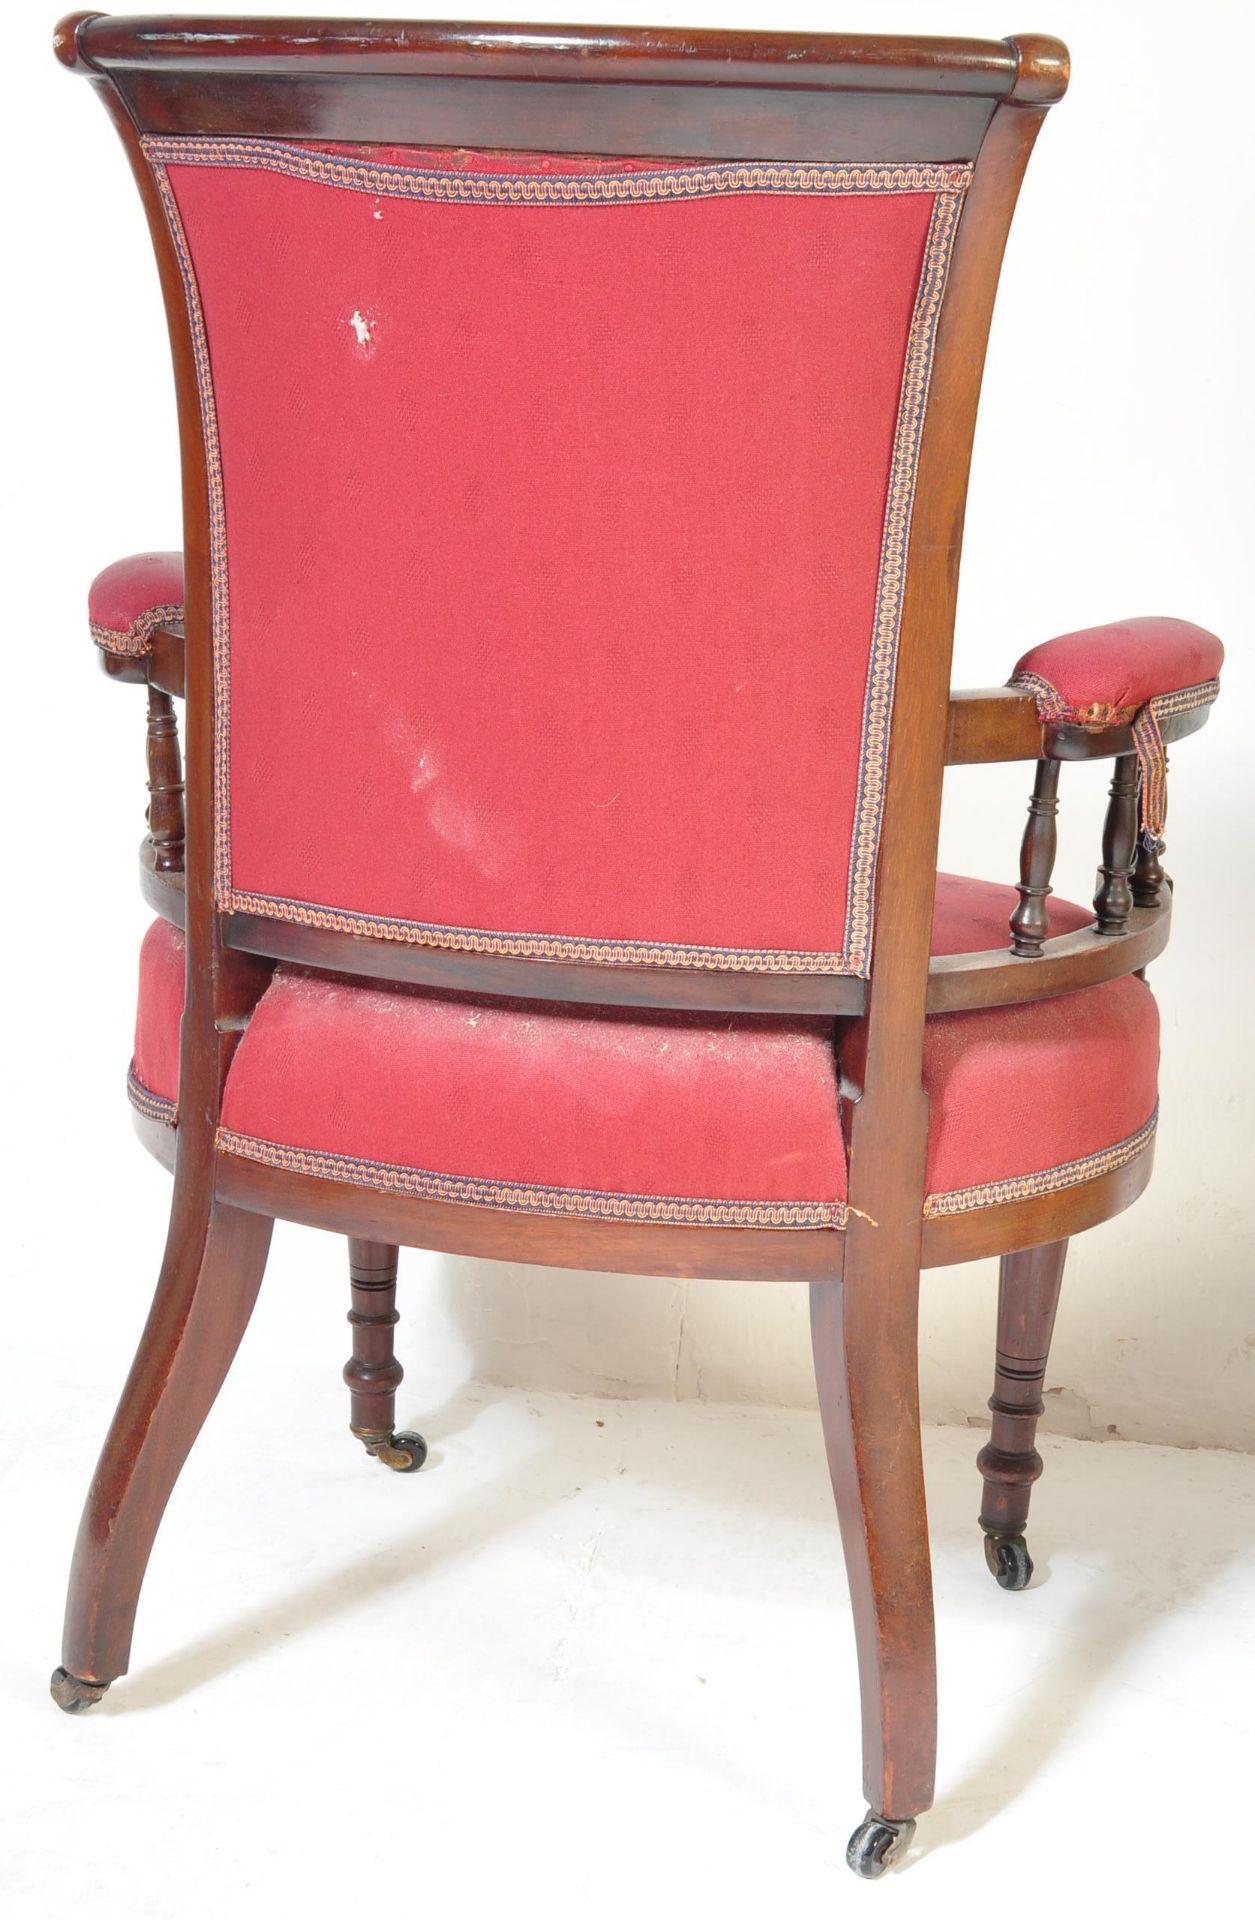 VICTORIAN MAHOGANY INDUSTRIAL OFFICE ARMCHAIR DESK CHAIR - Image 6 of 6